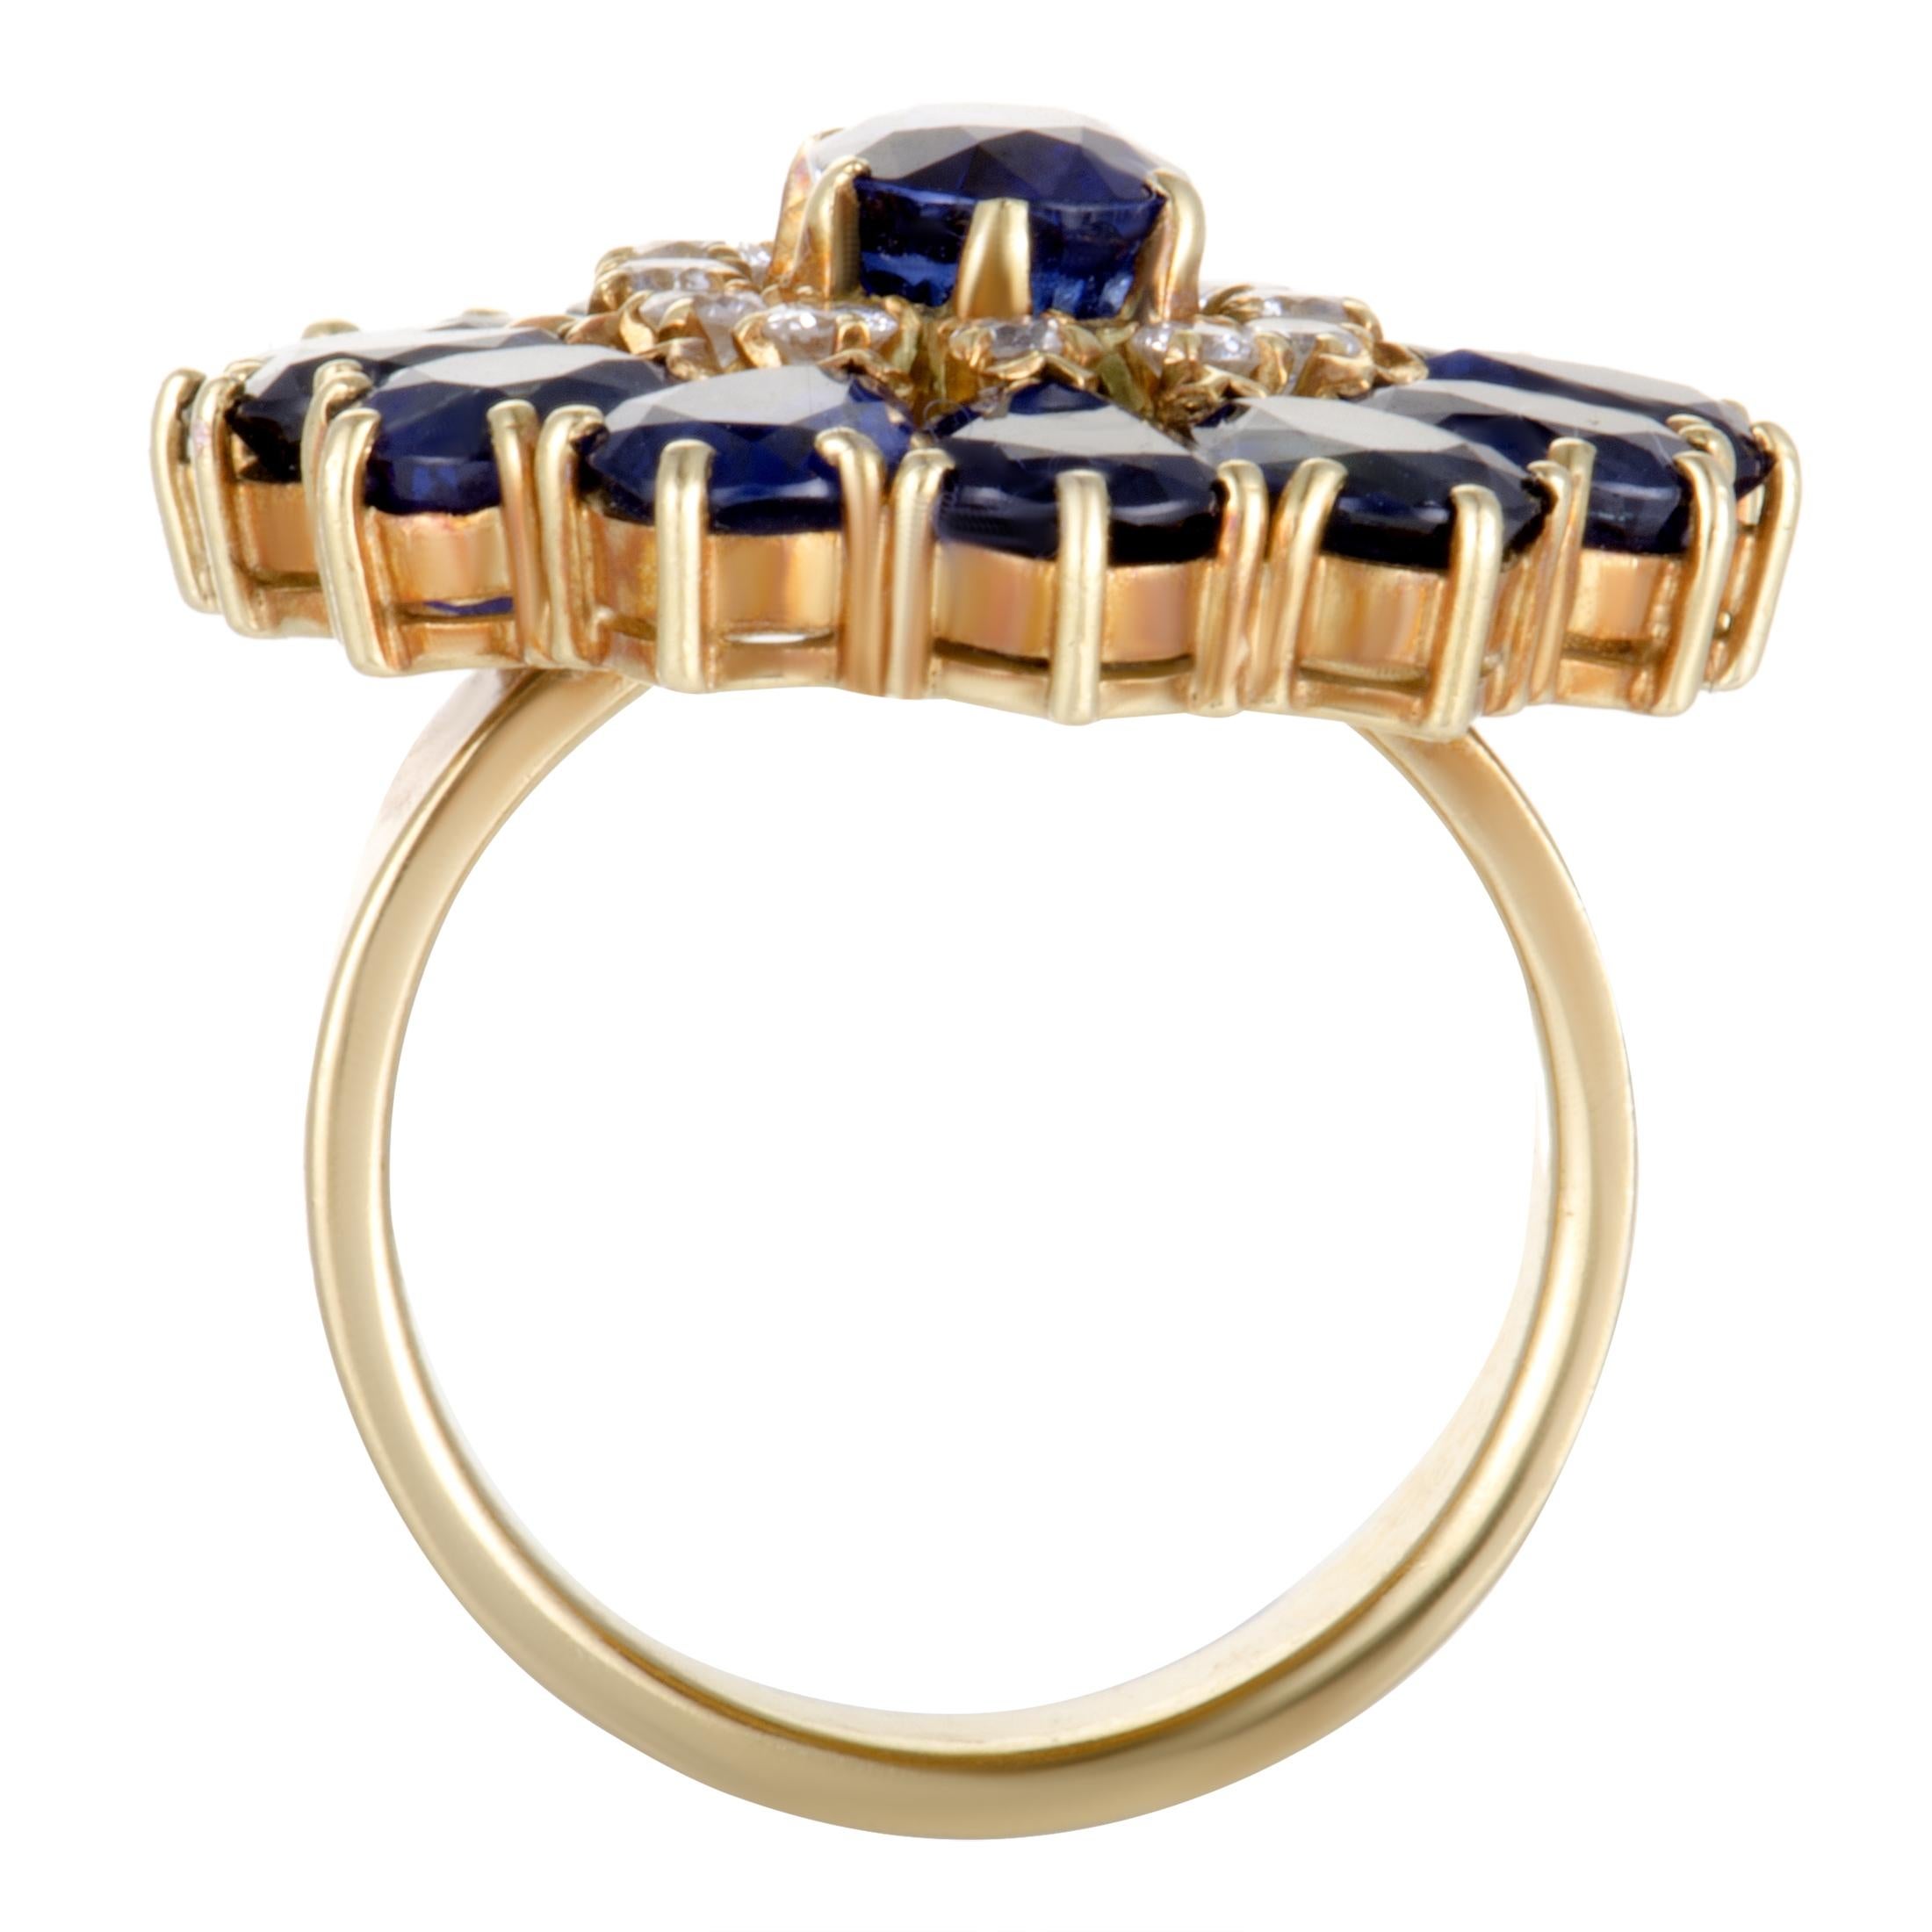 This utterly stunning ring by Mikimoto is uniquely crafted in the beautiful glisten of 18K yellow gold. The spectacular floral design is adorned in 0.36ct of dazzling diamonds and 8.19ct of sensational blue sapphires that give the ring an